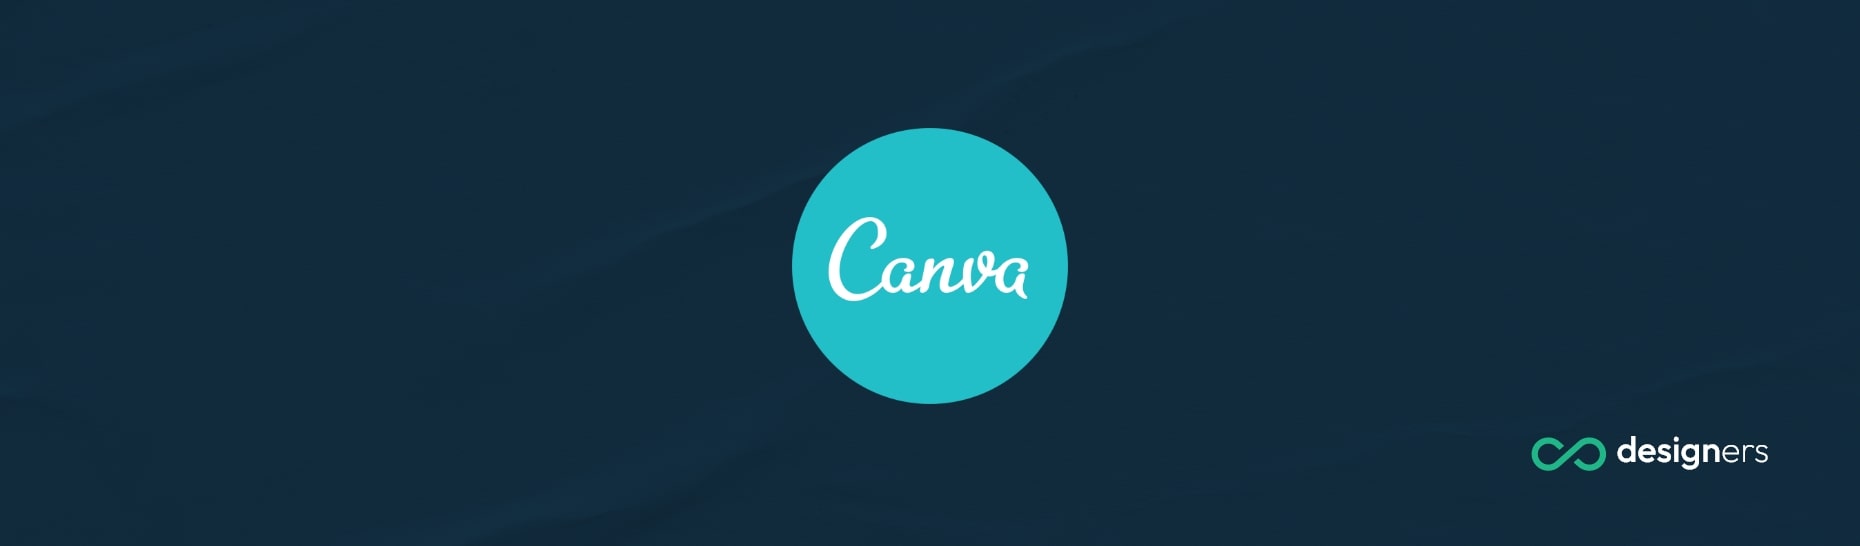 Does Canva work with EPS files?